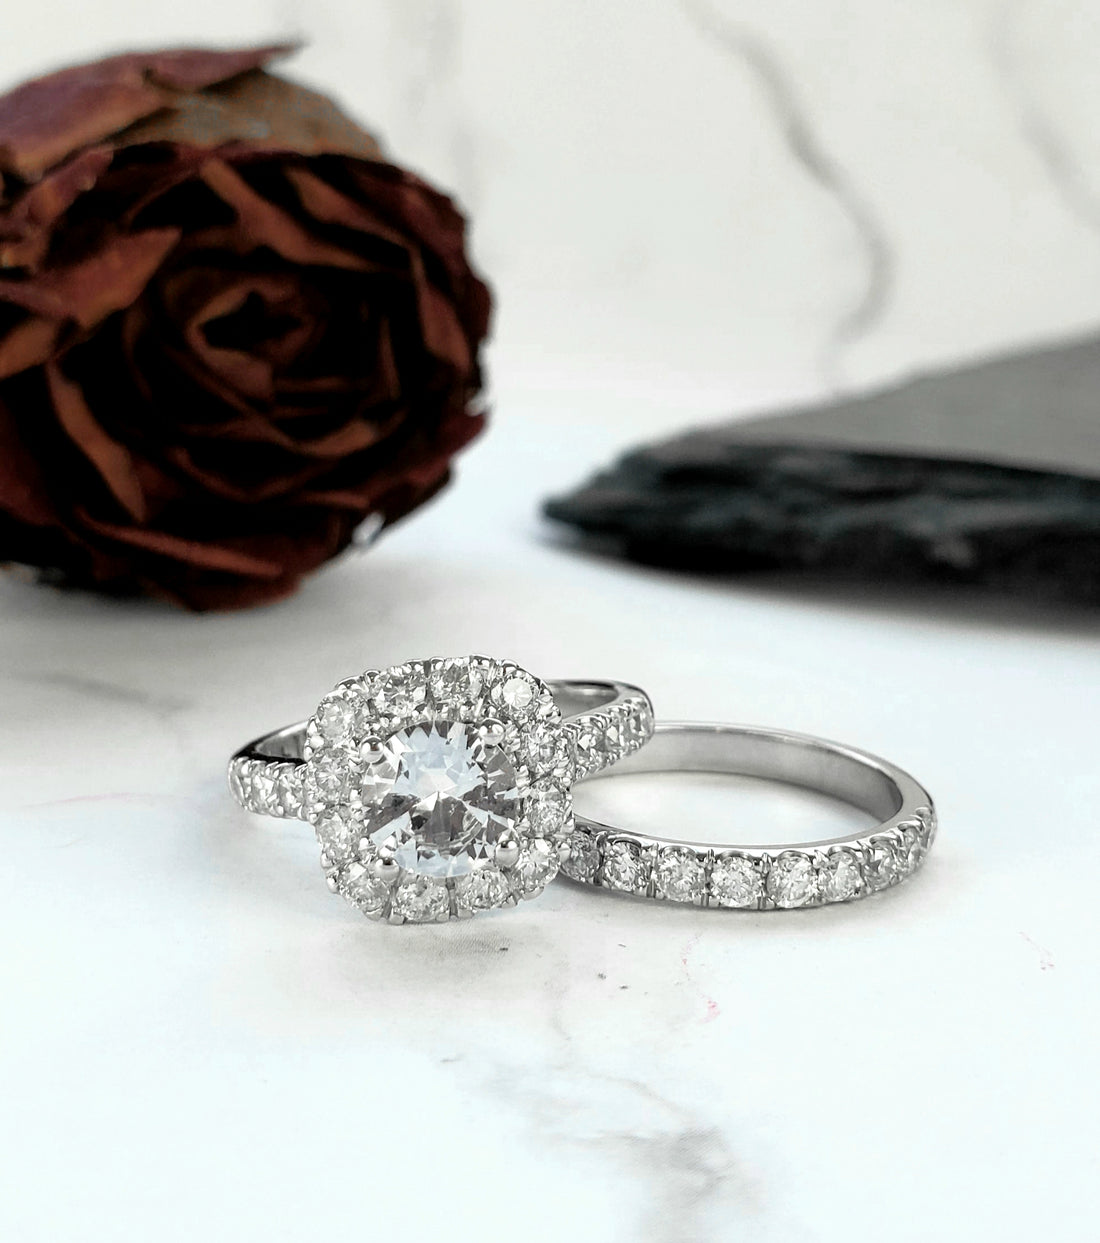 What To Do With Your Engagement Ring After a Divorce?